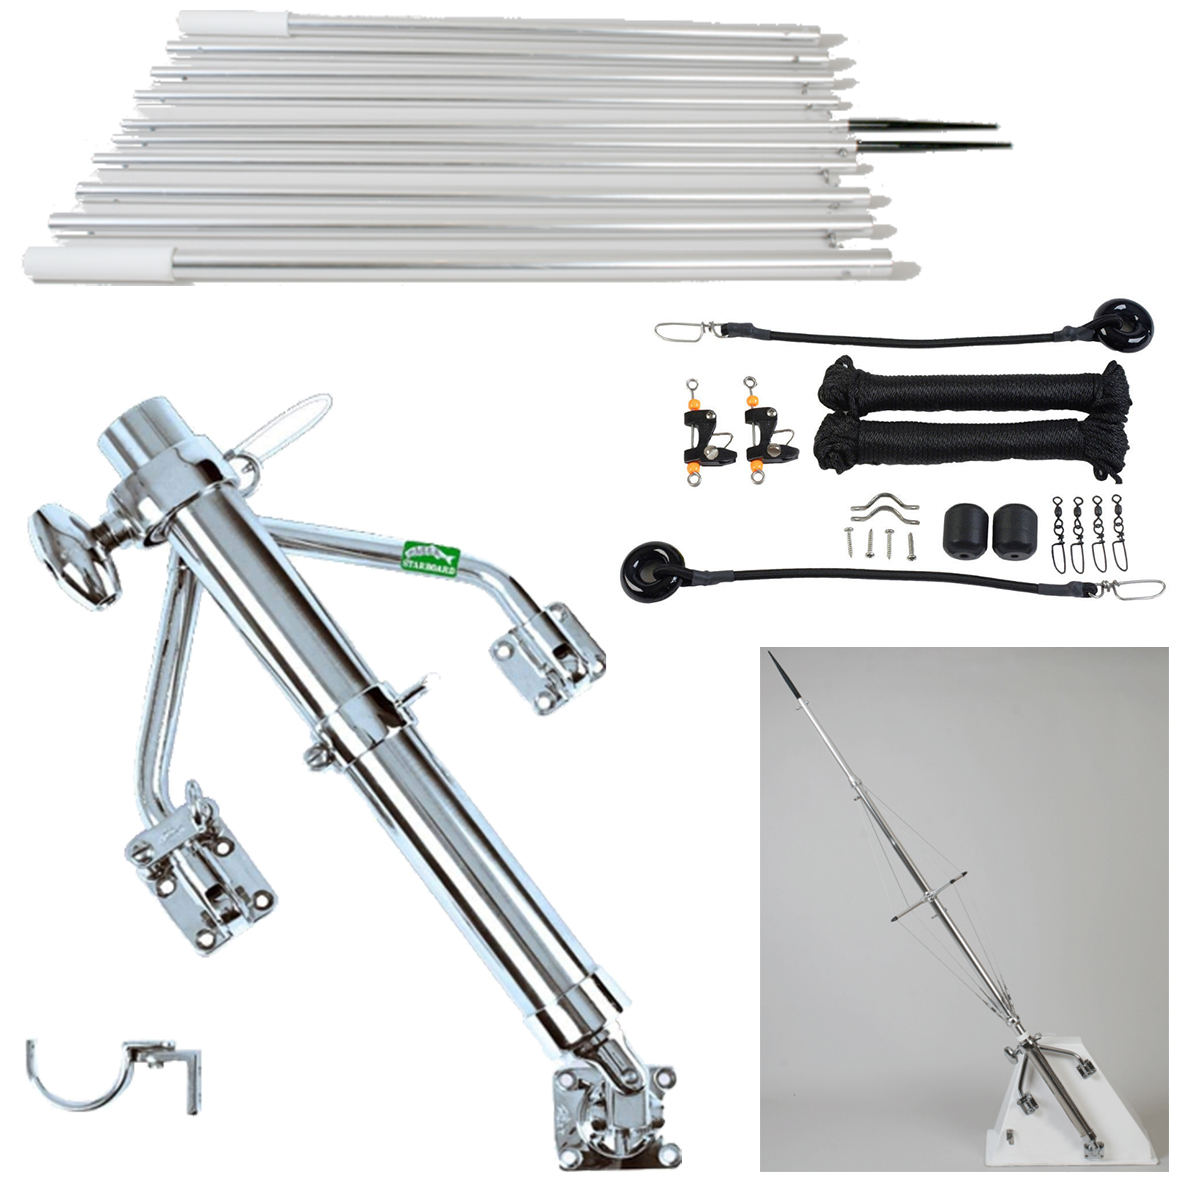 Lee's Tackle Jr Outrigger Kit for 19 to 23 ft Trailer Boats